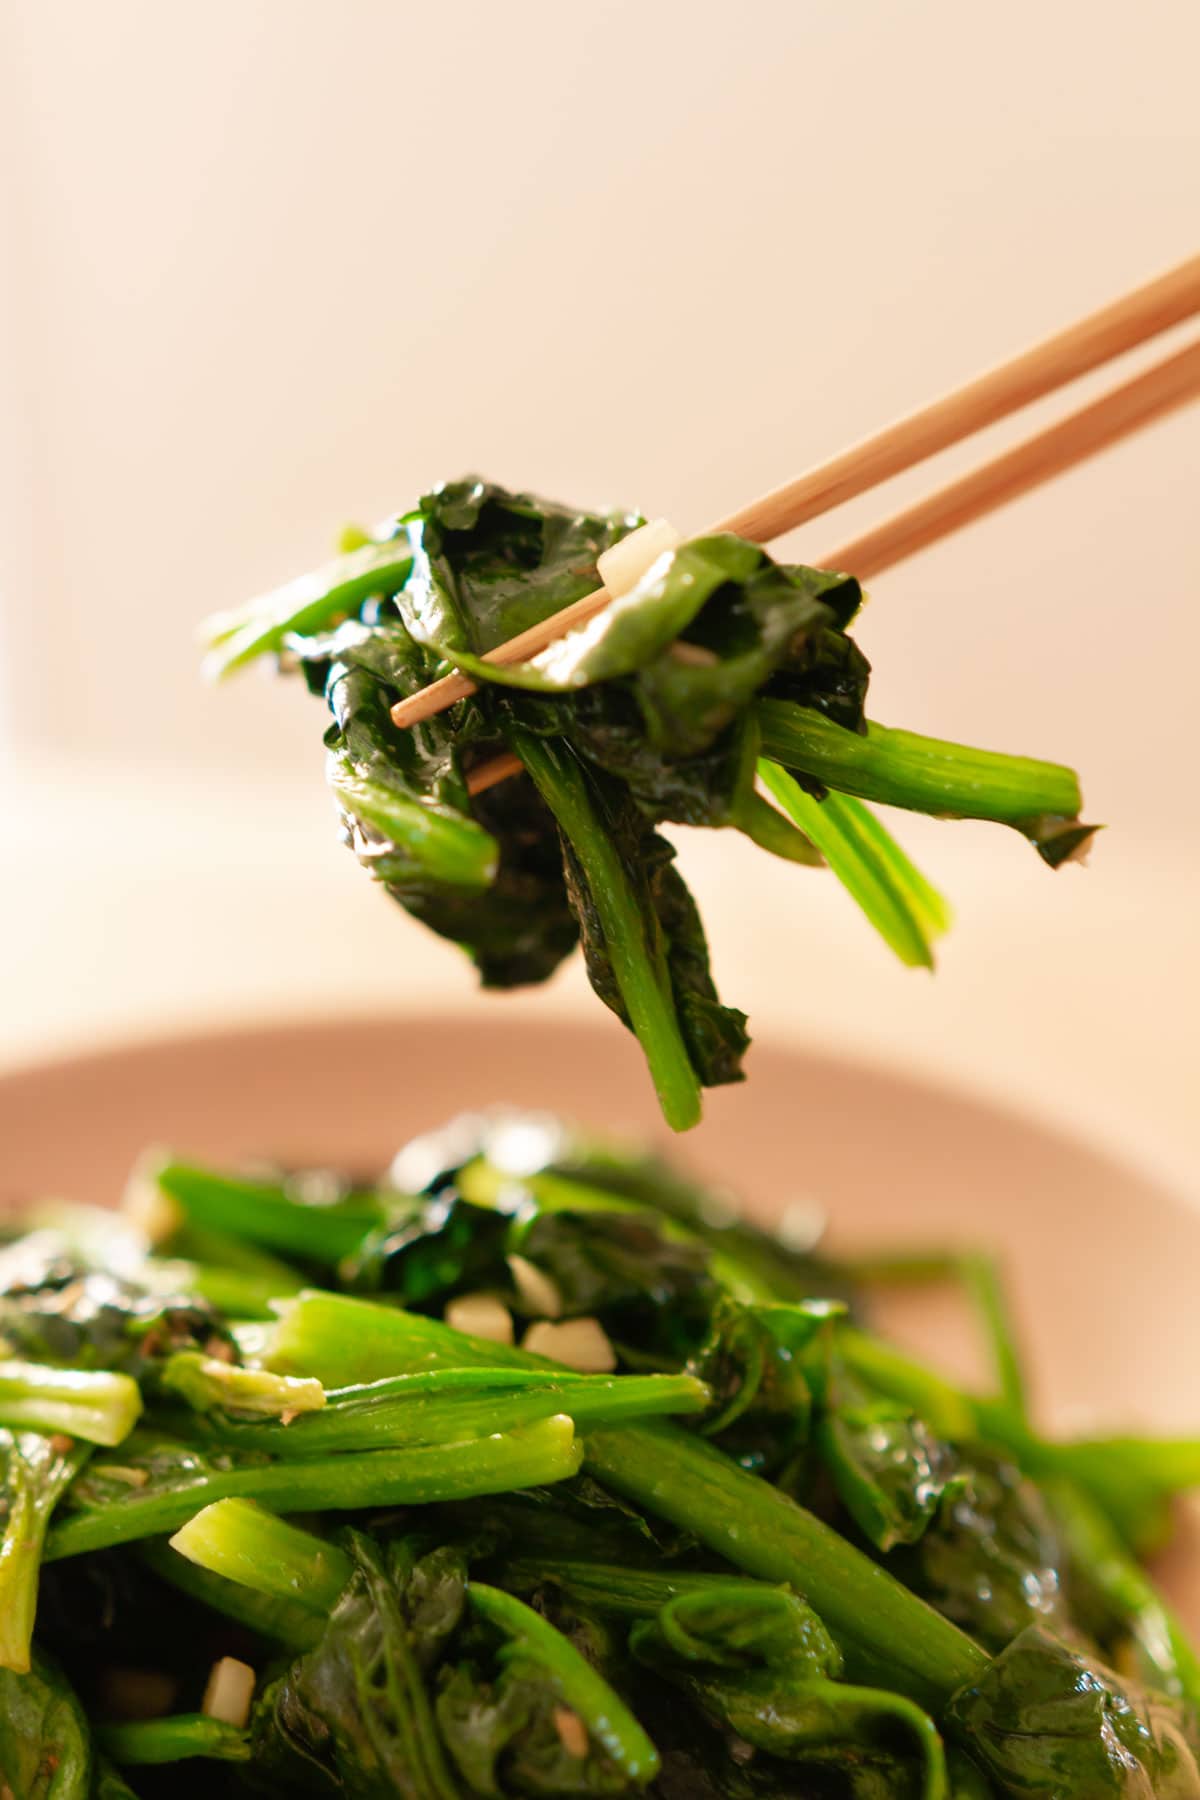 A close up view of chopsticks picking up a bite of stir-fried spinach from a serving plate.